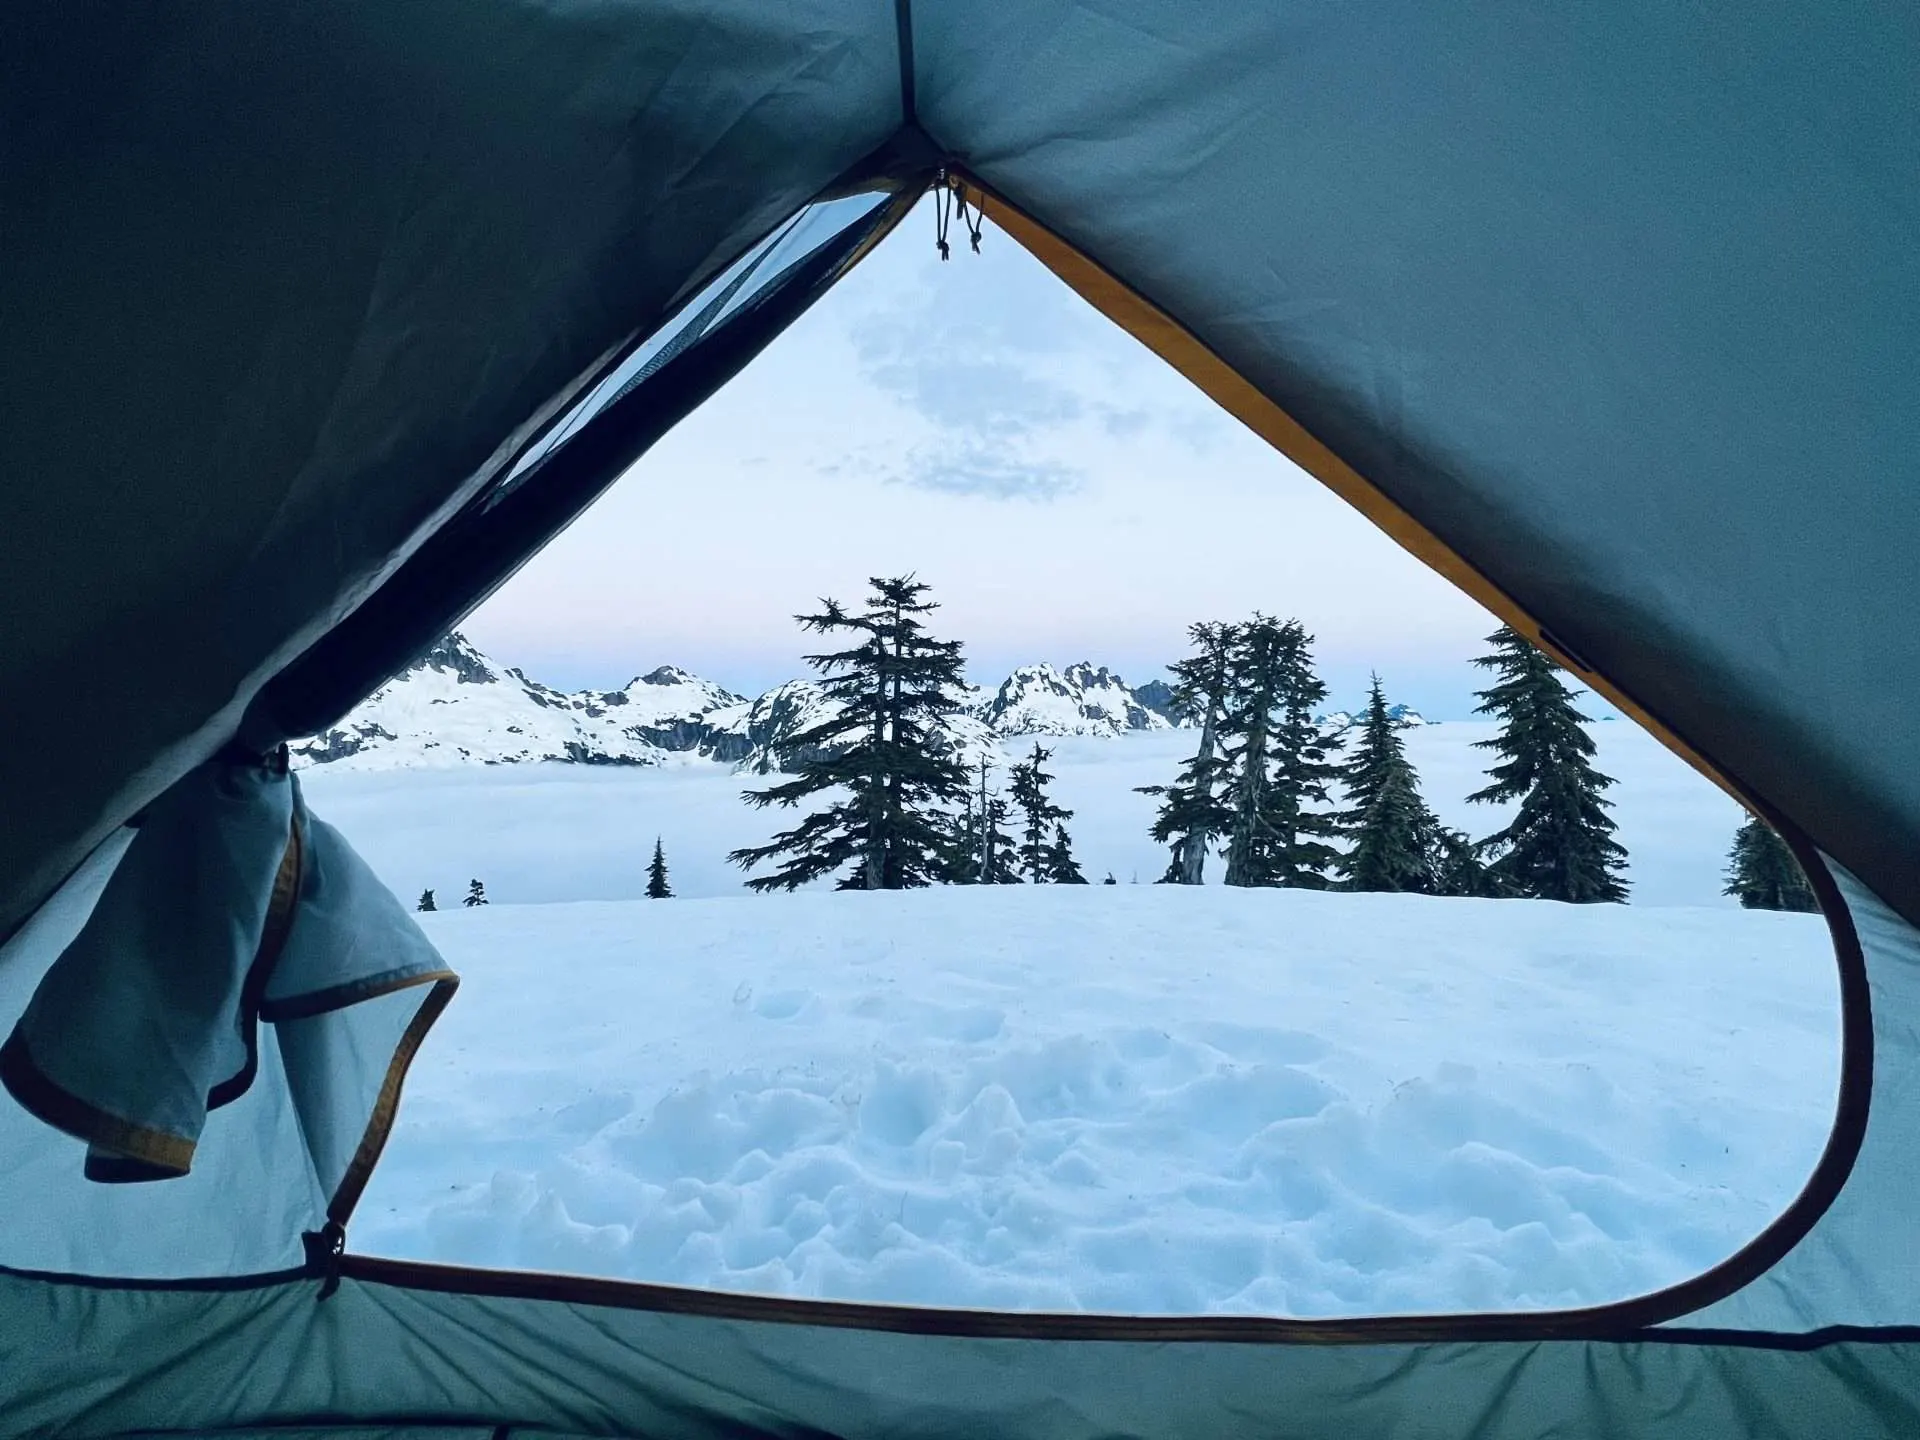 View looking out of tent to snow